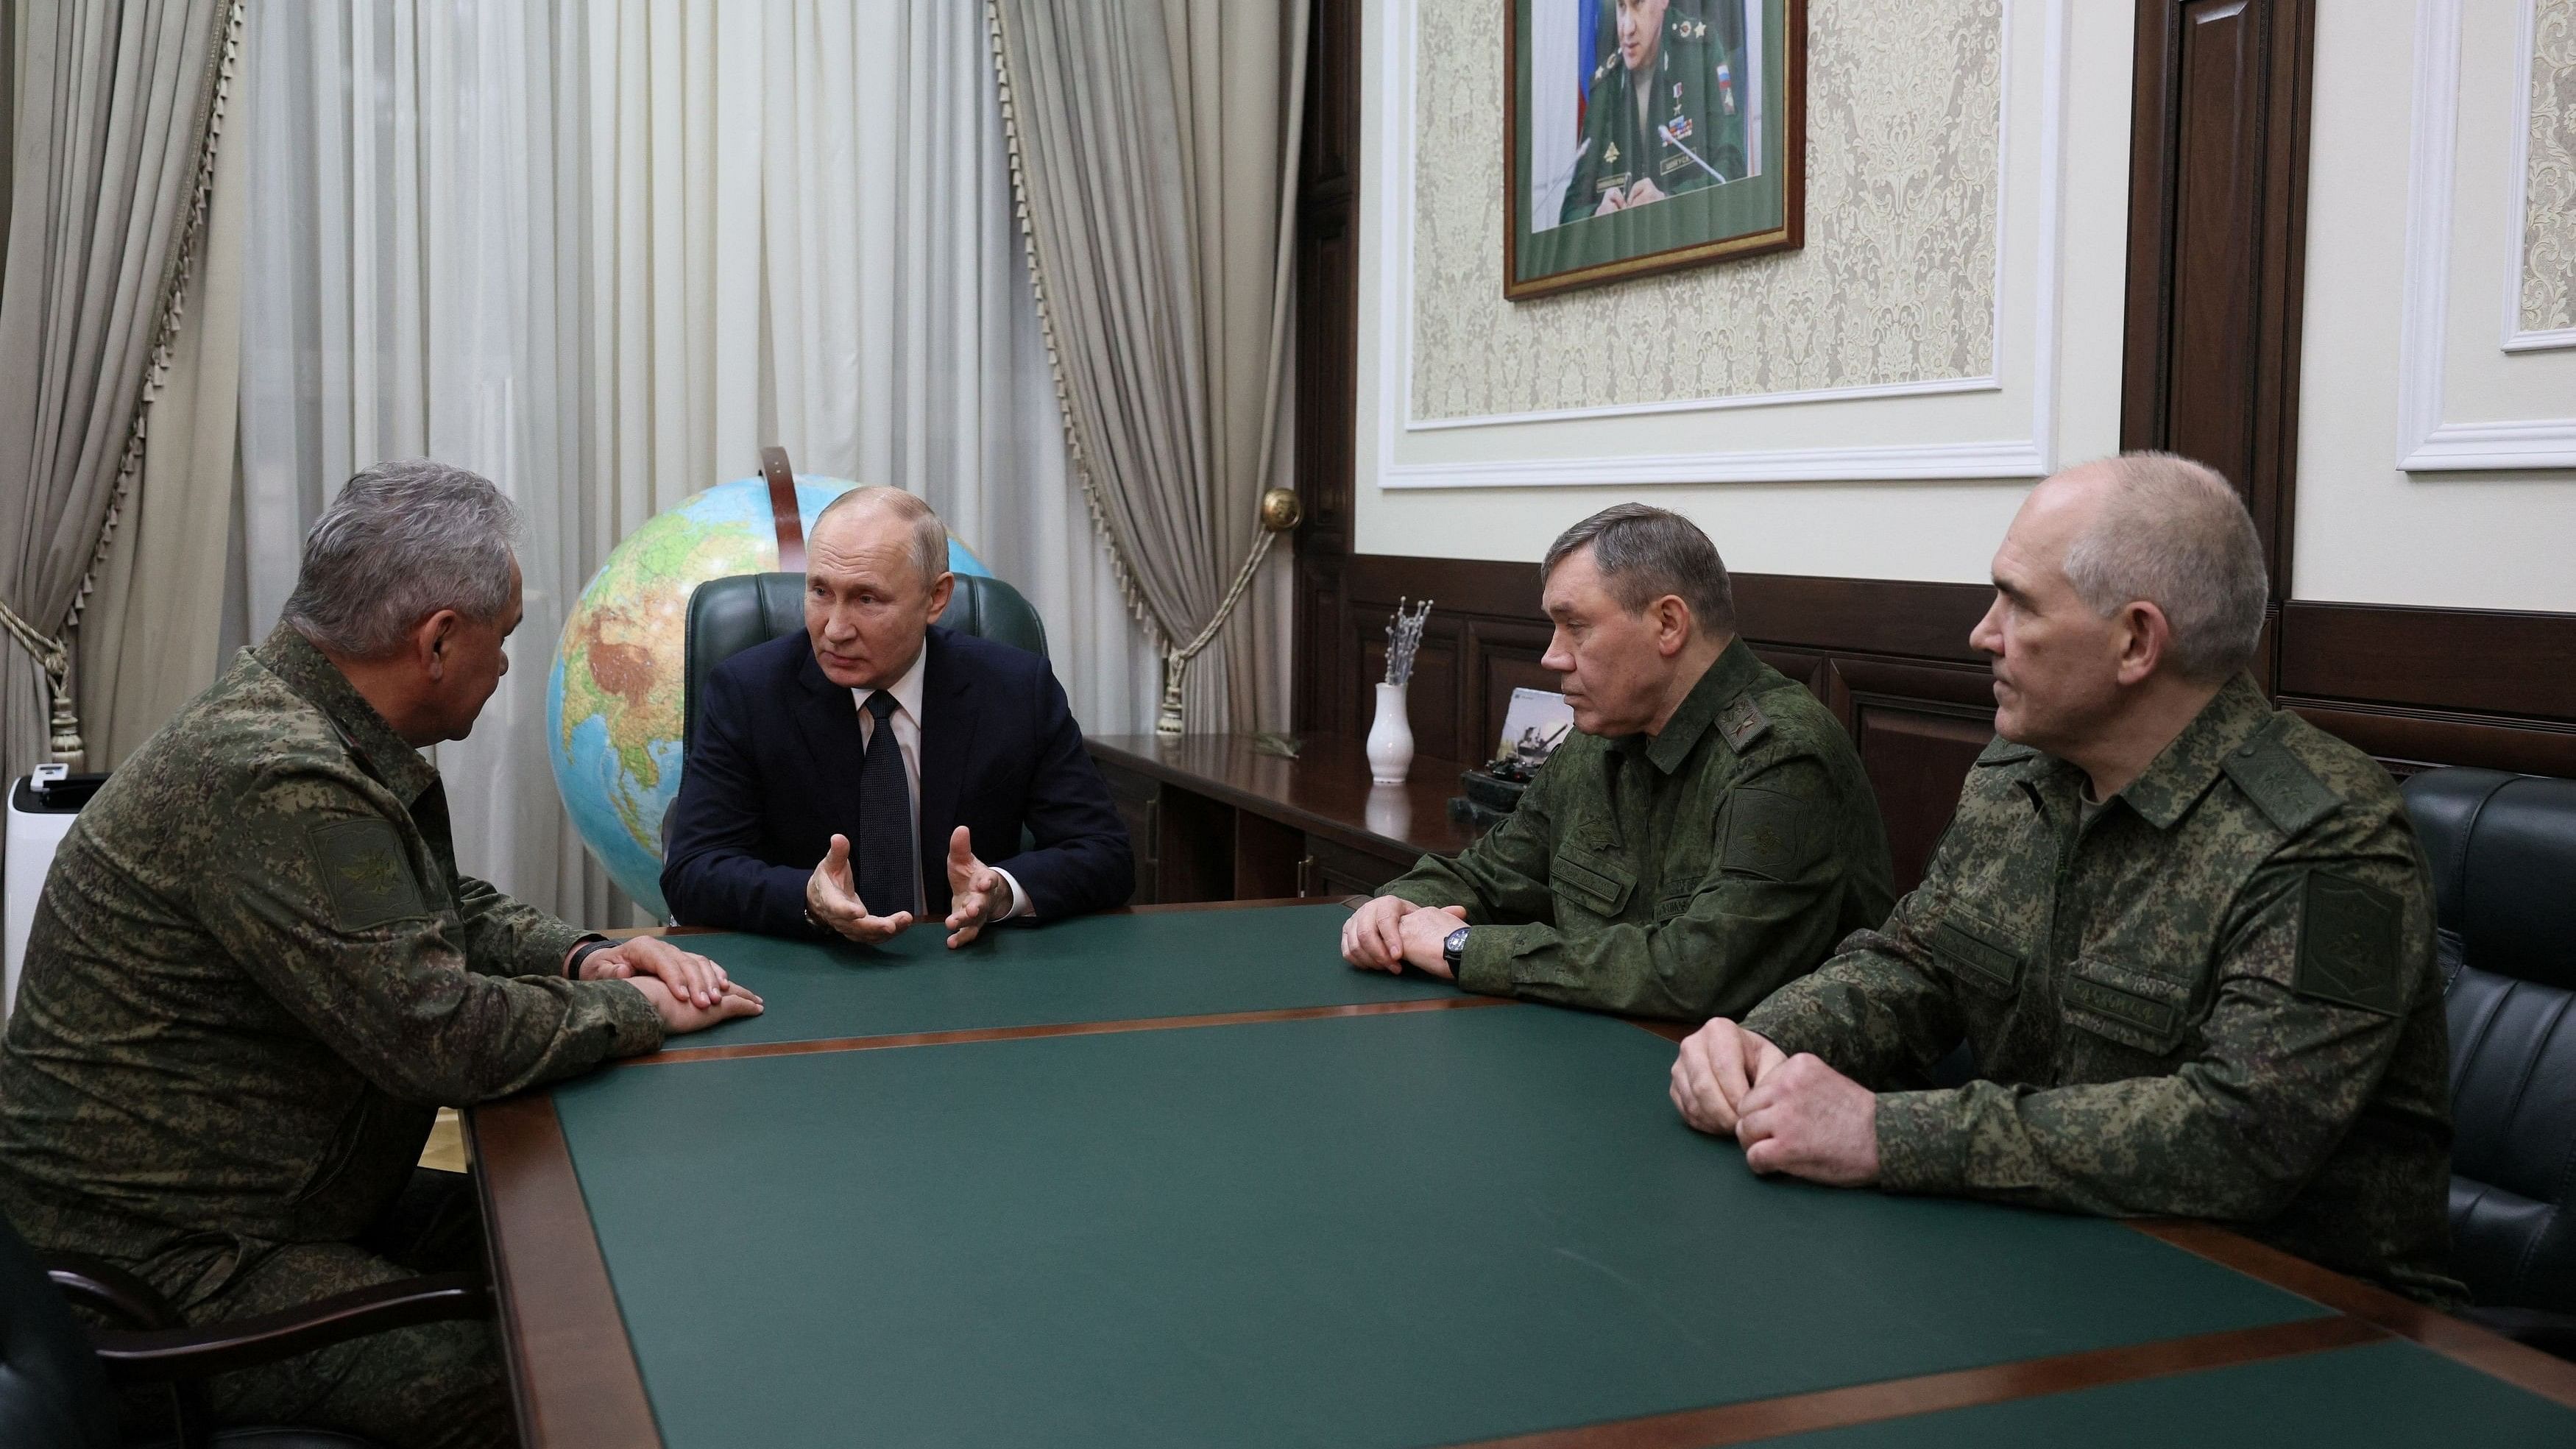 <div class="paragraphs"><p>Russia's President Vladimir Putin meets with Defence Minister Sergei Shoigu, Chief of the General Staff Valery Gerasimov and Head of the Main Operational Directorate of the Armed Forces' General Staff Sergei Rudskoi.</p></div>